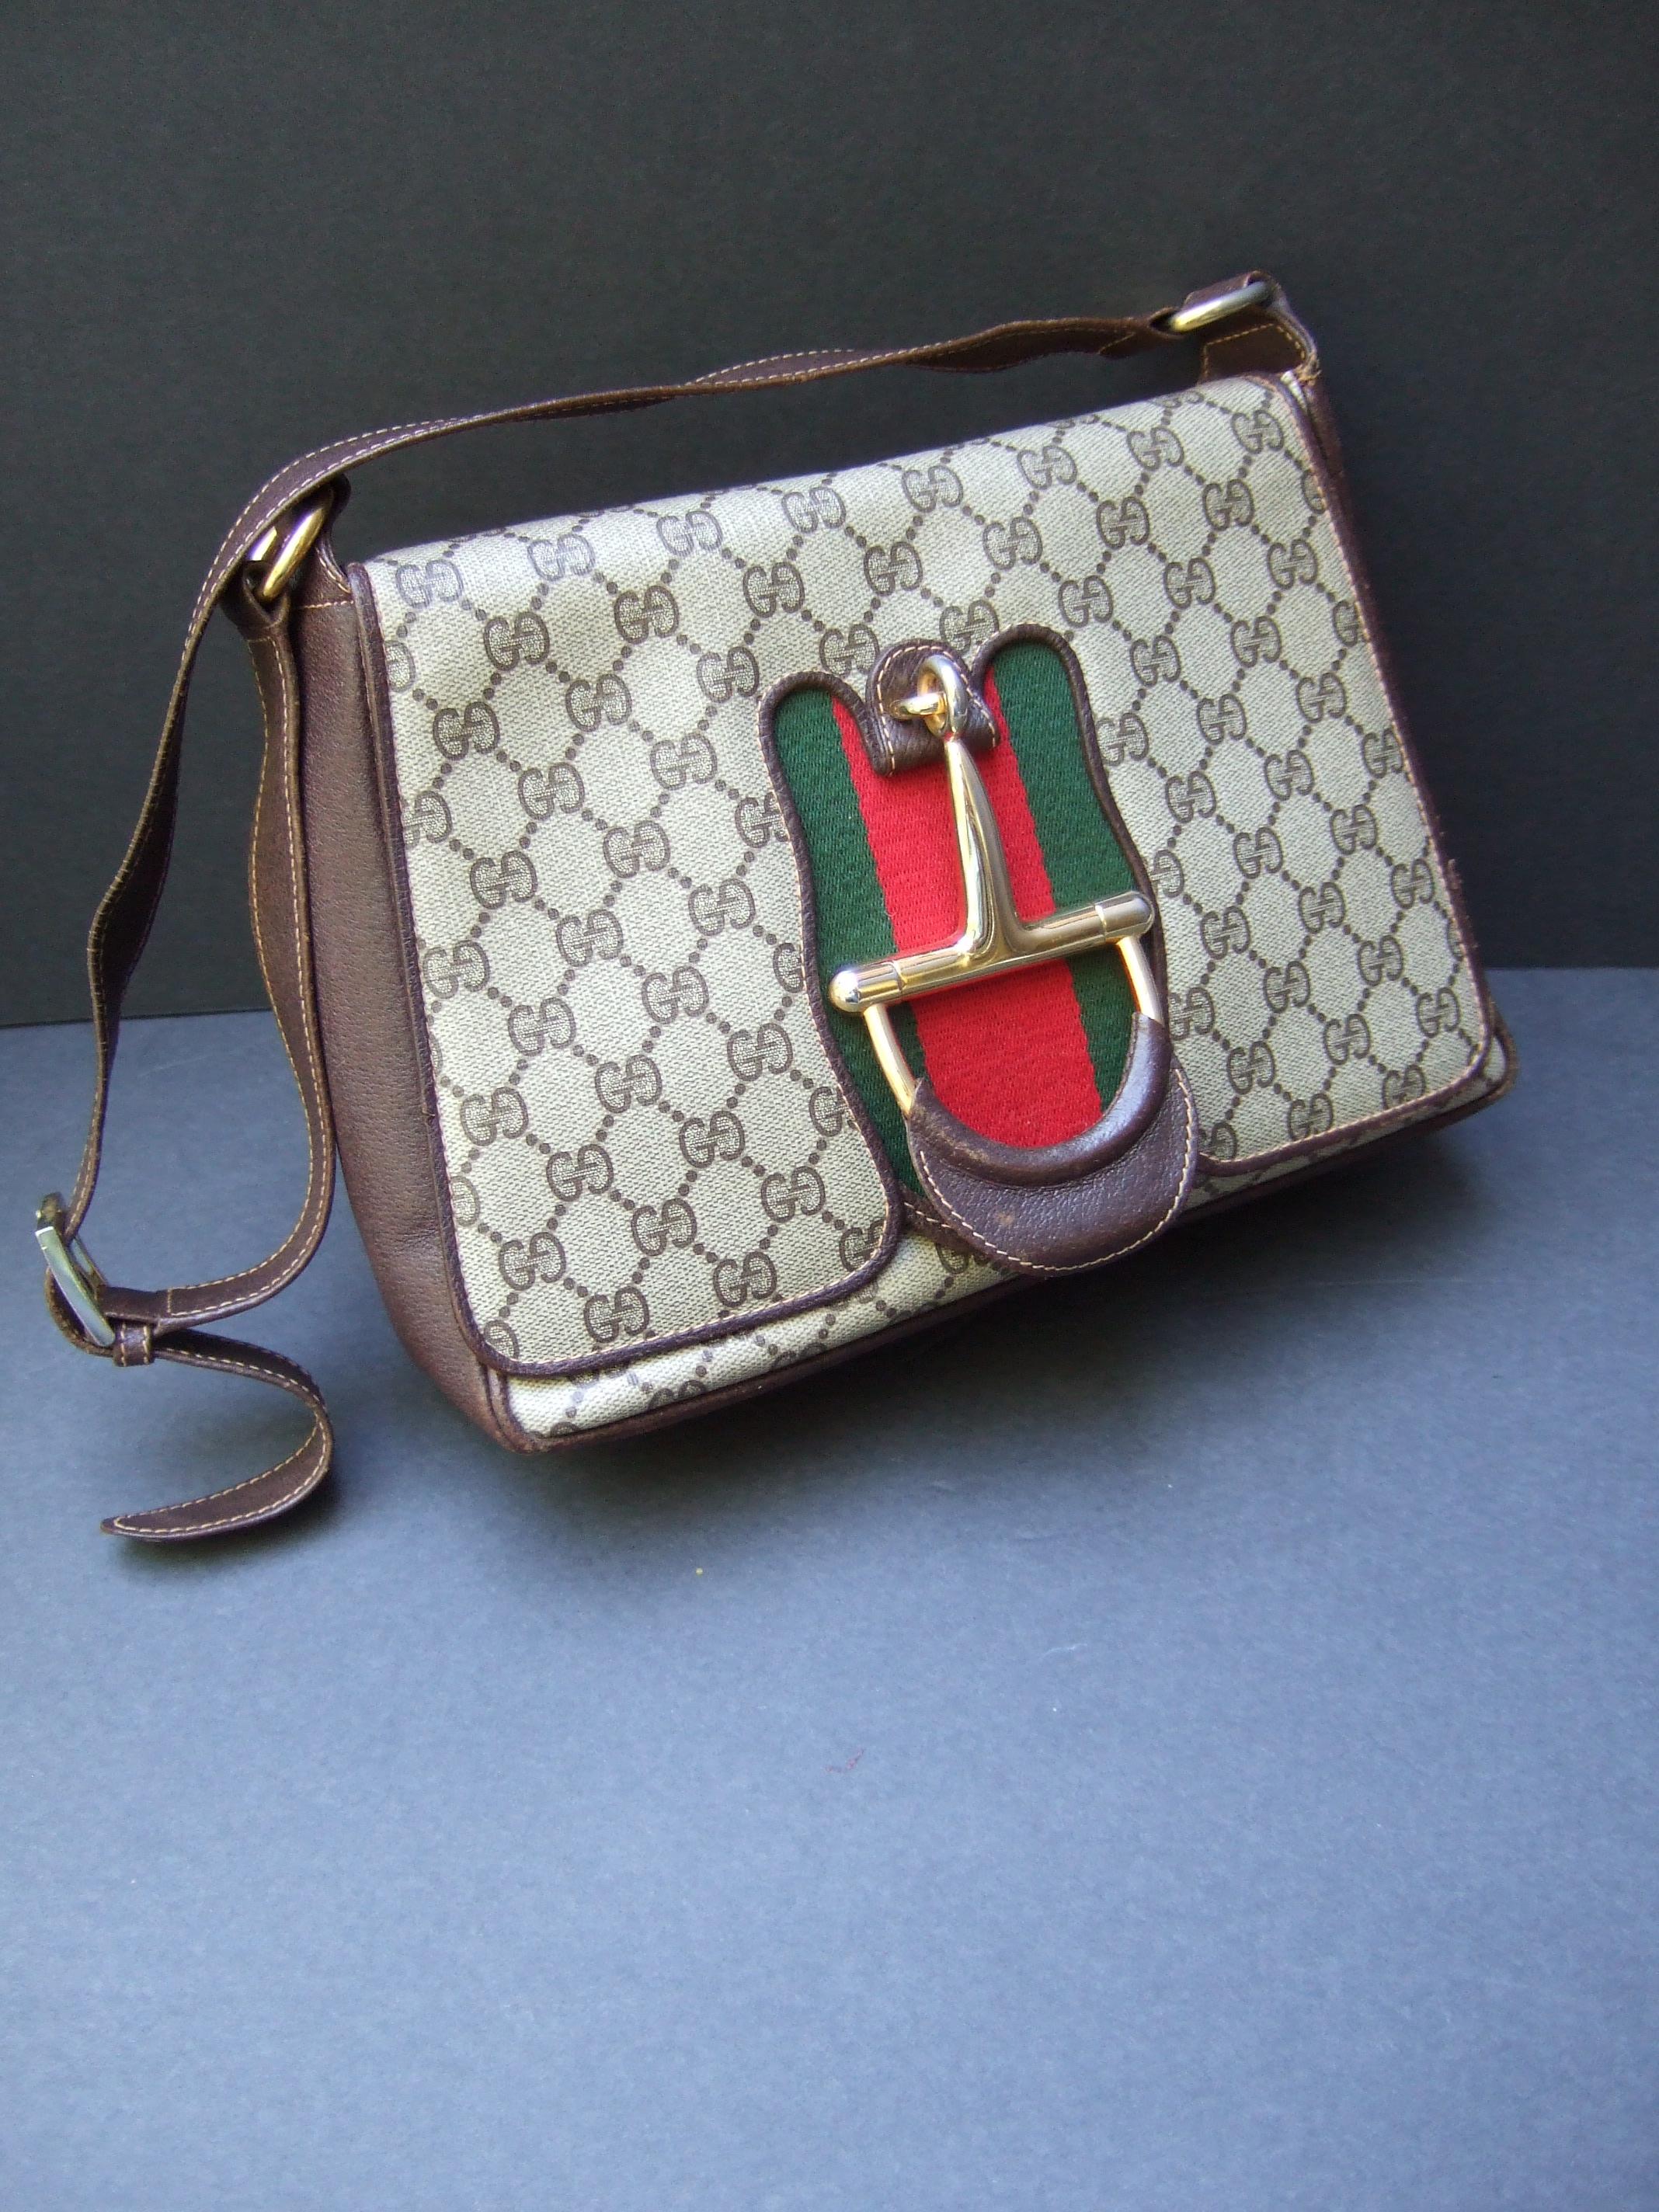 Gucci Italy Rare Gilt metal bridal medallion brown coated canvas shoulder bag c 1970s
The stylish Italian handbag is adorned with a huge scale gilt metal bridal medallion 
framed with Gucci's iconic red & green canvas webbed stripes 

The saddle